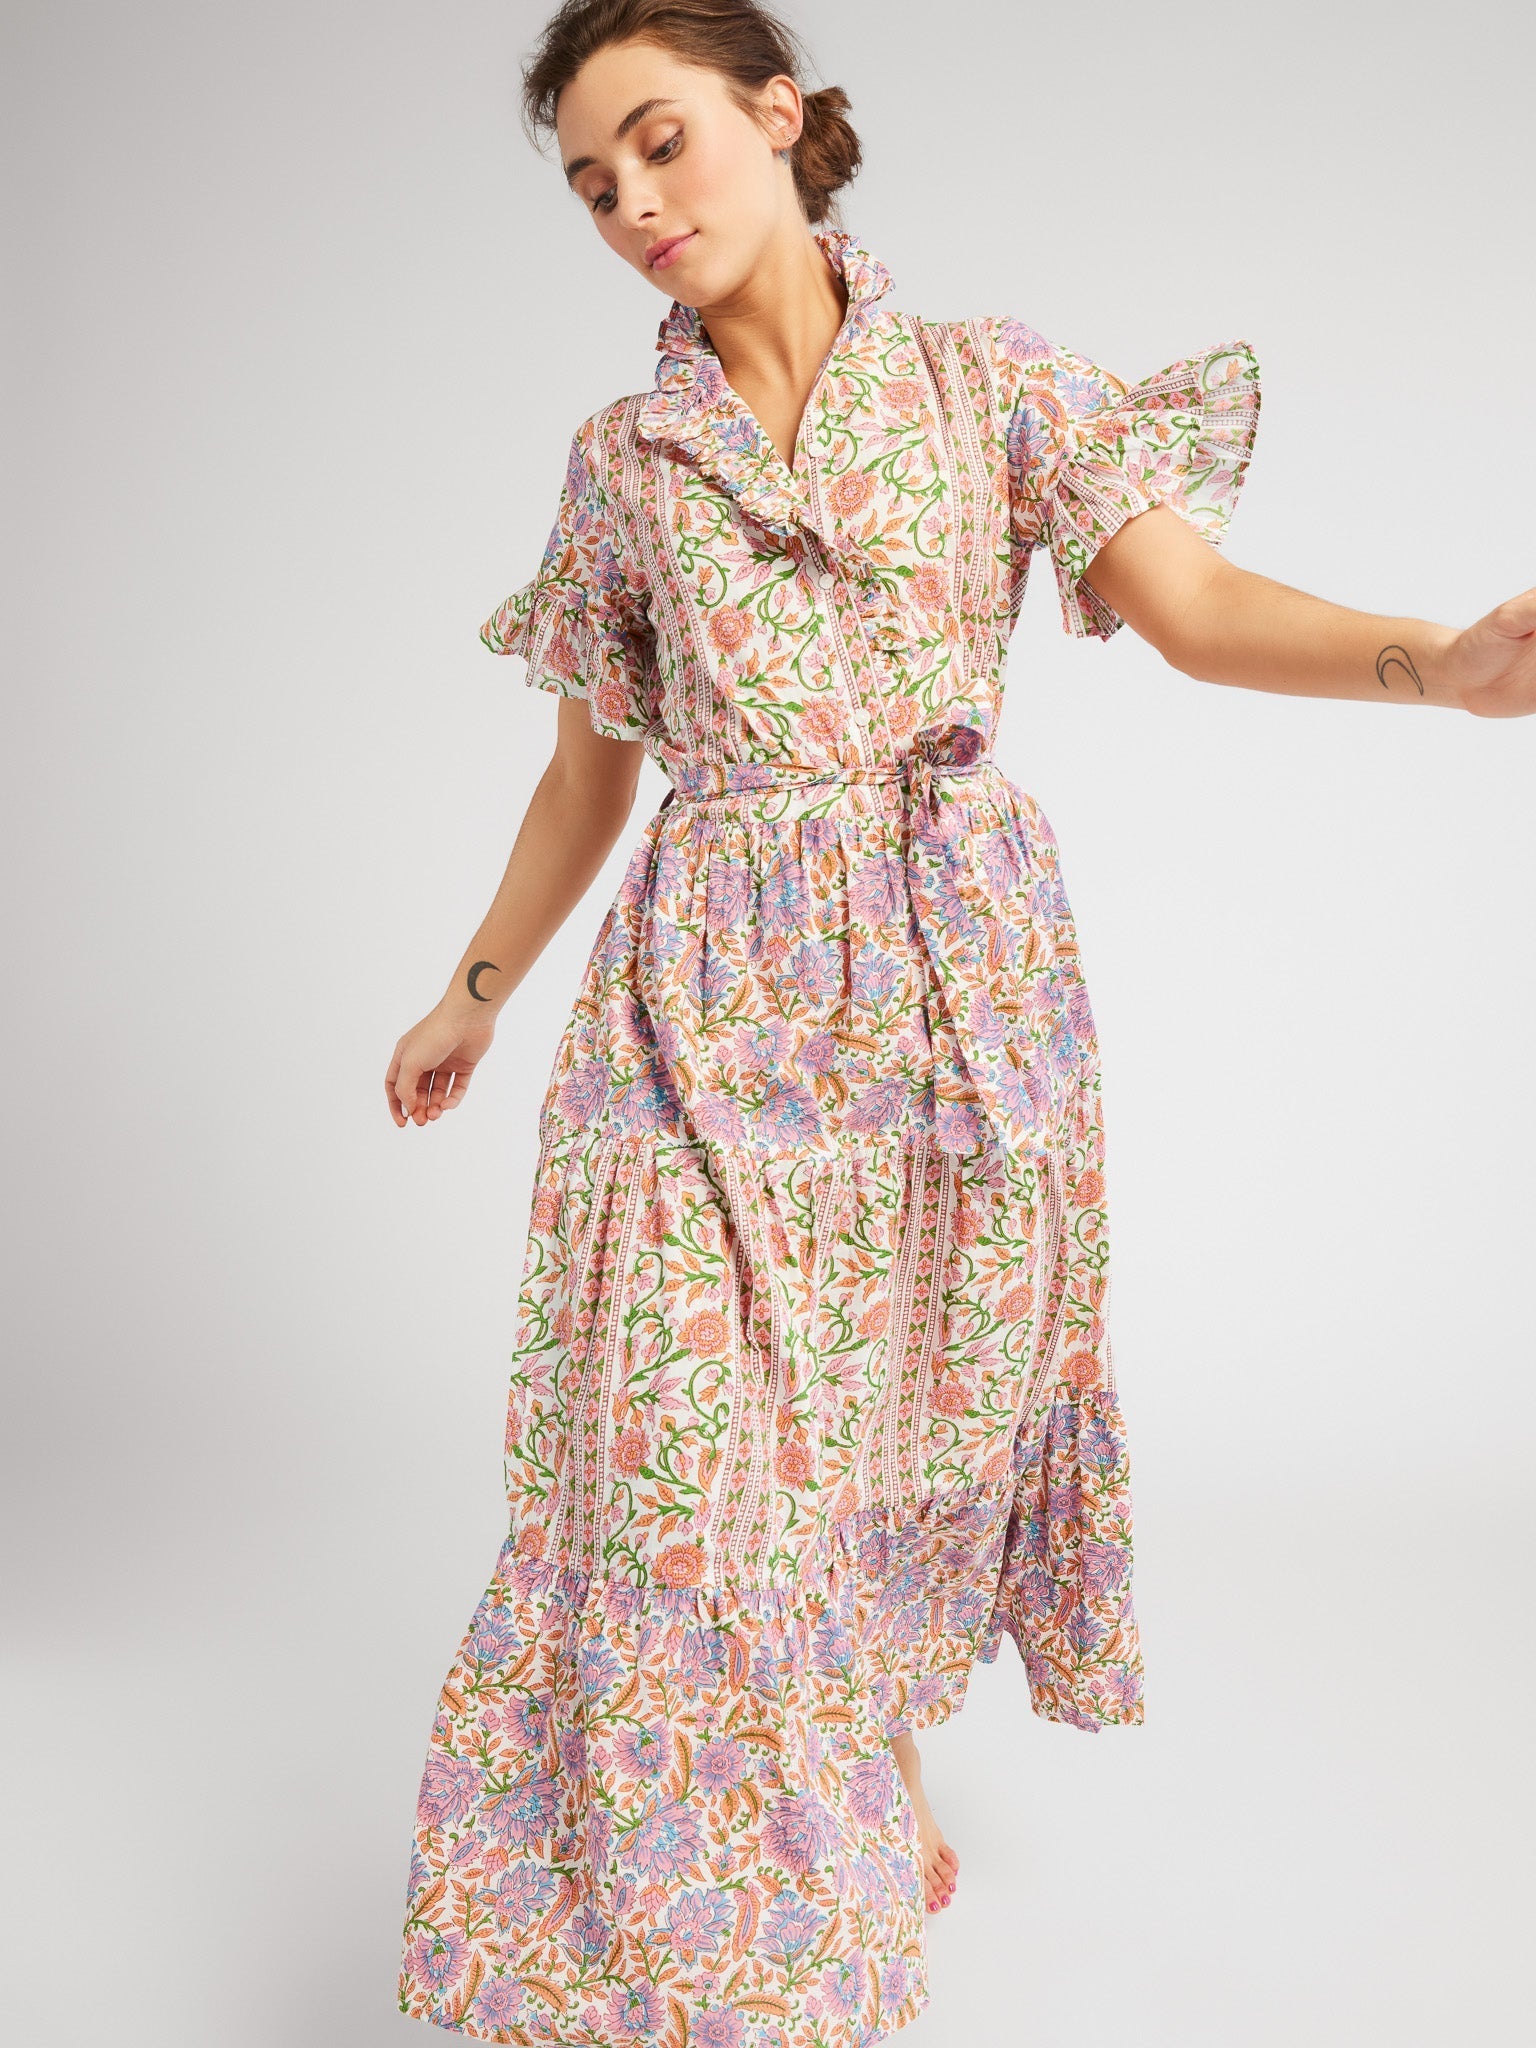 MILLE Clothing Victoria Dress in Avignon Floral